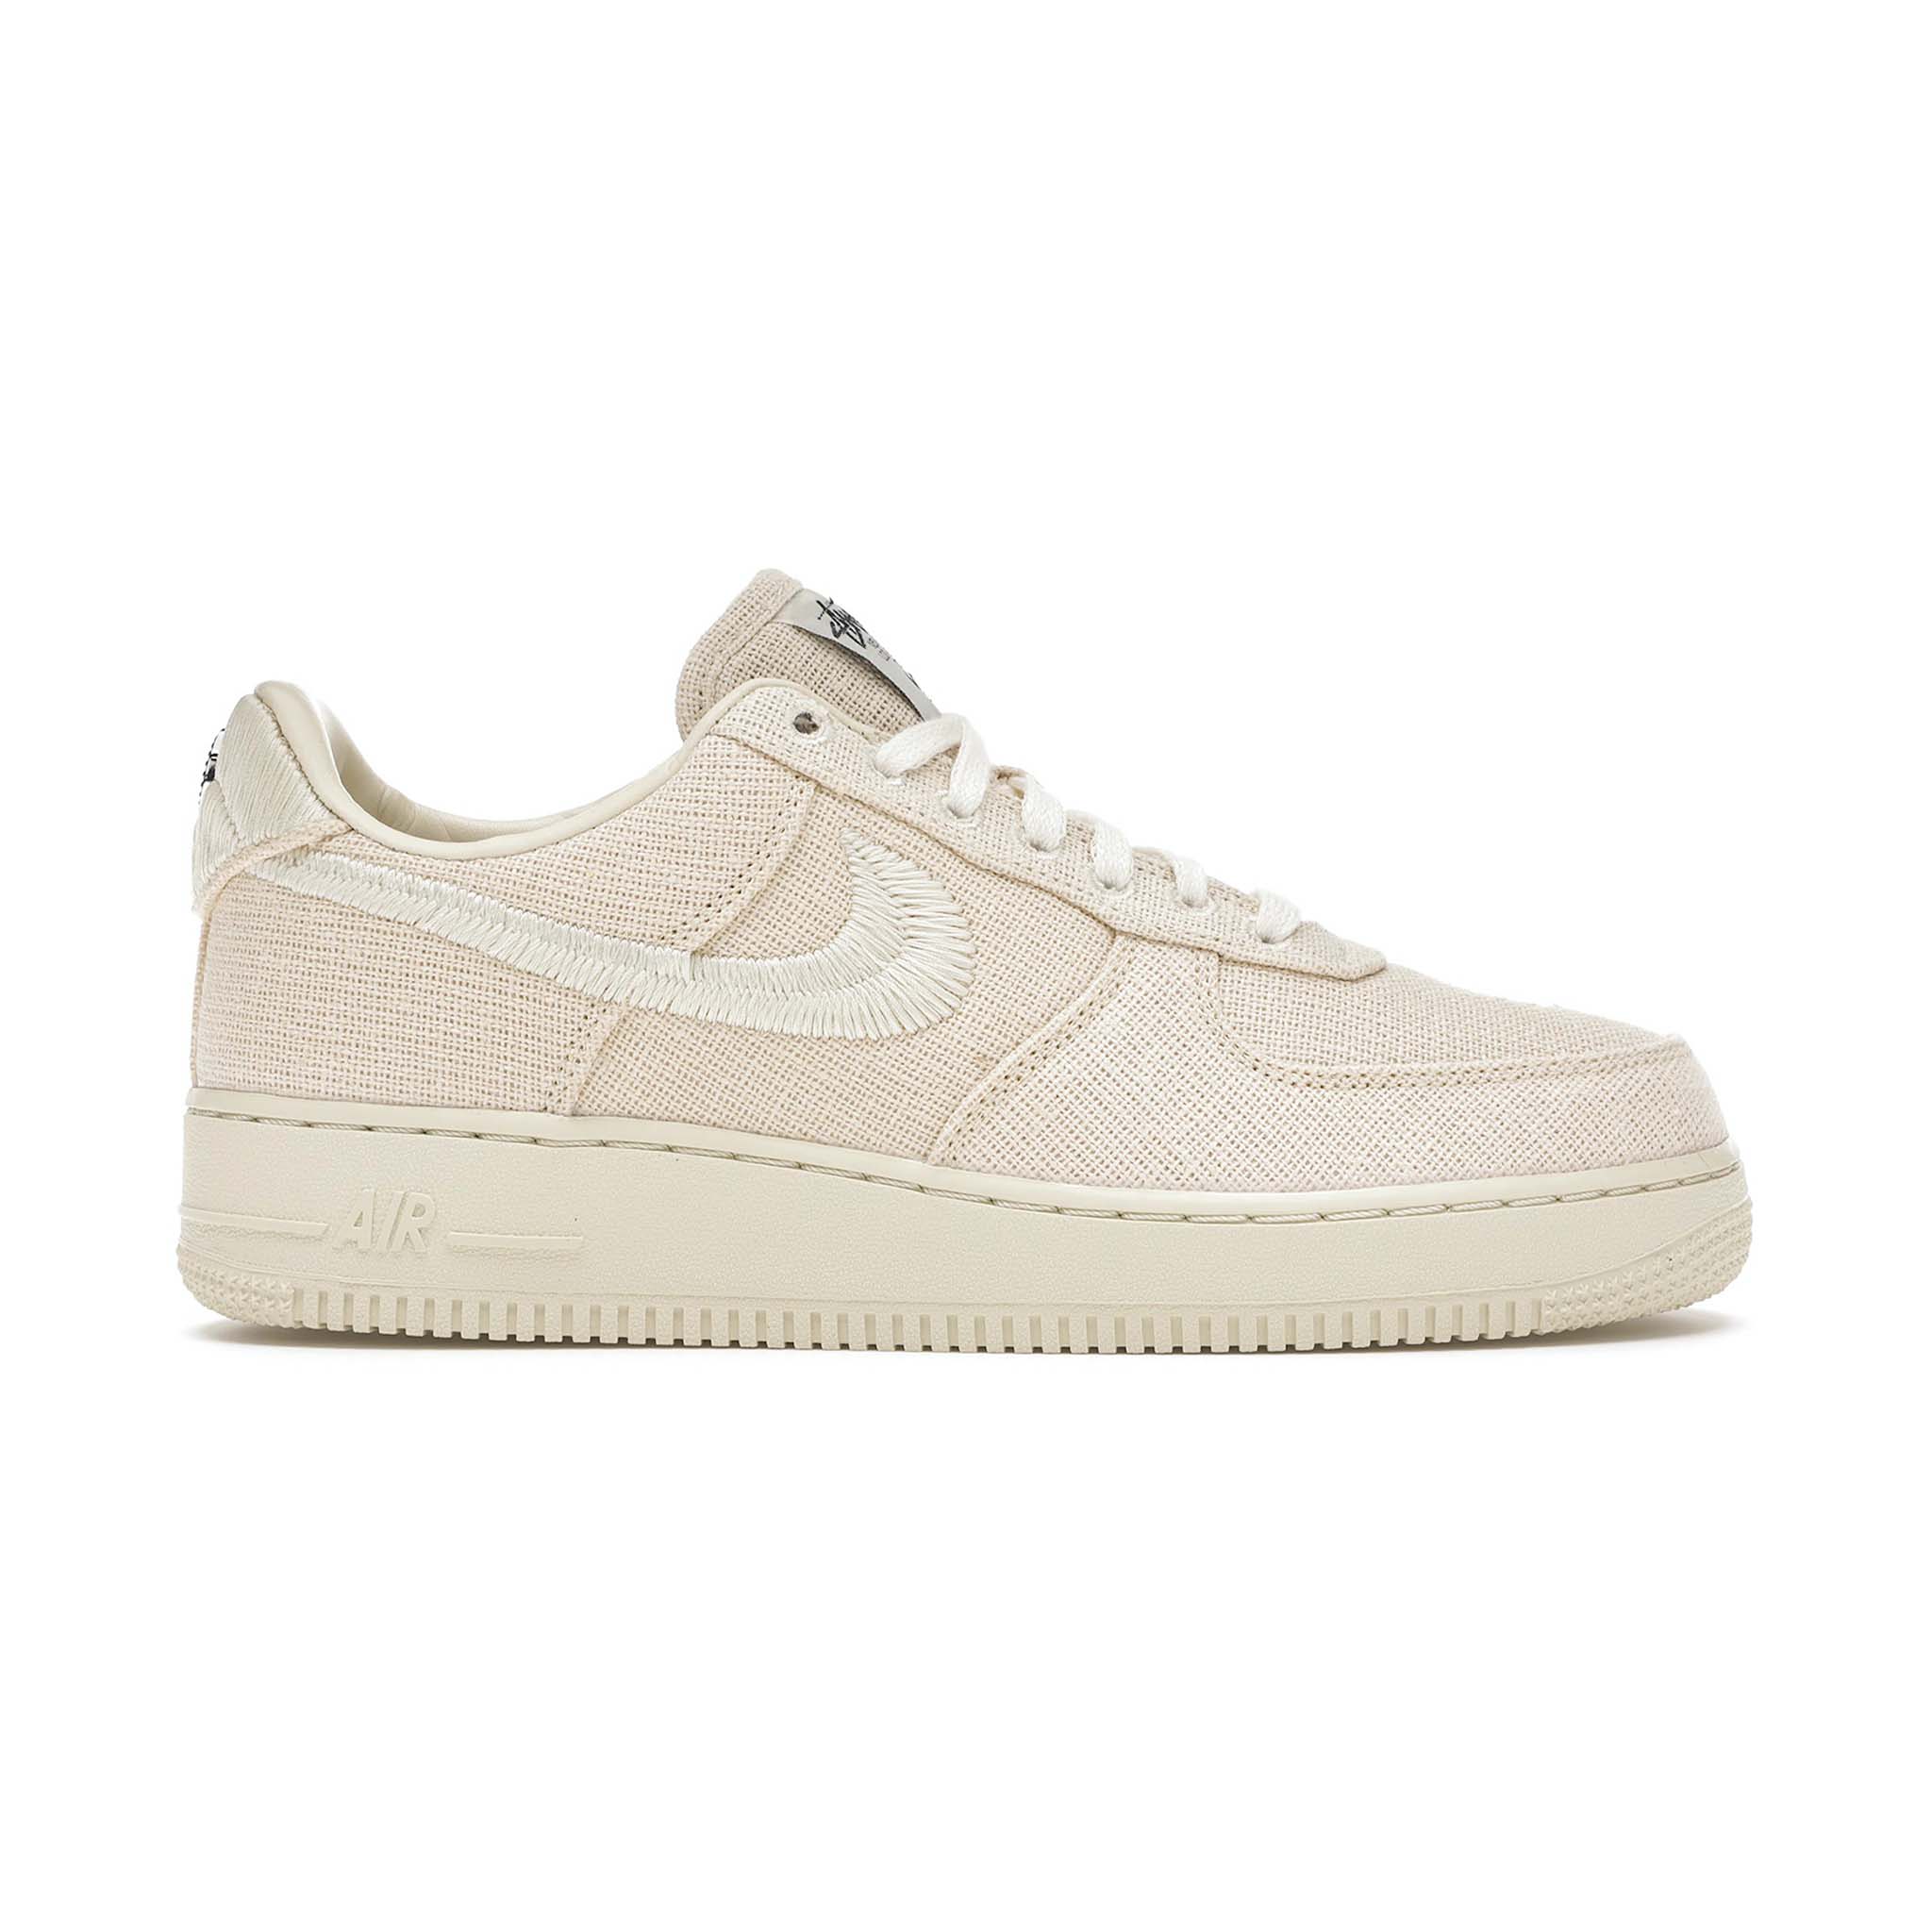 Nike Air Force 1 '07 LV8 'Fossil